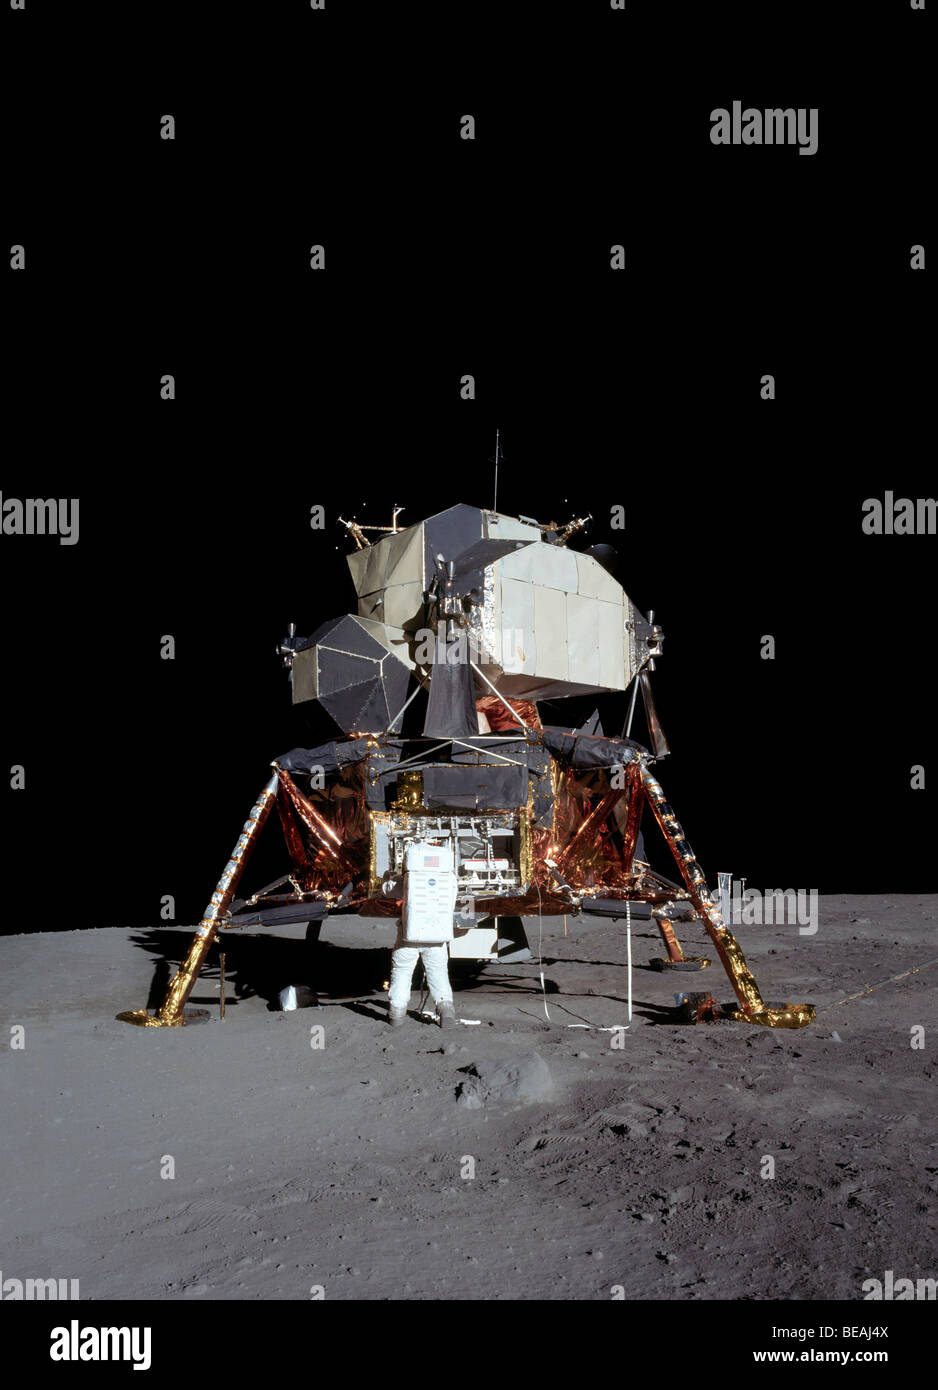 Apollo 11 astronaut Buzz Aldrin and the lunar module on the moon. Credit: NASA/Neil Armstrong. Optimised version of a NASA image Stock Photo